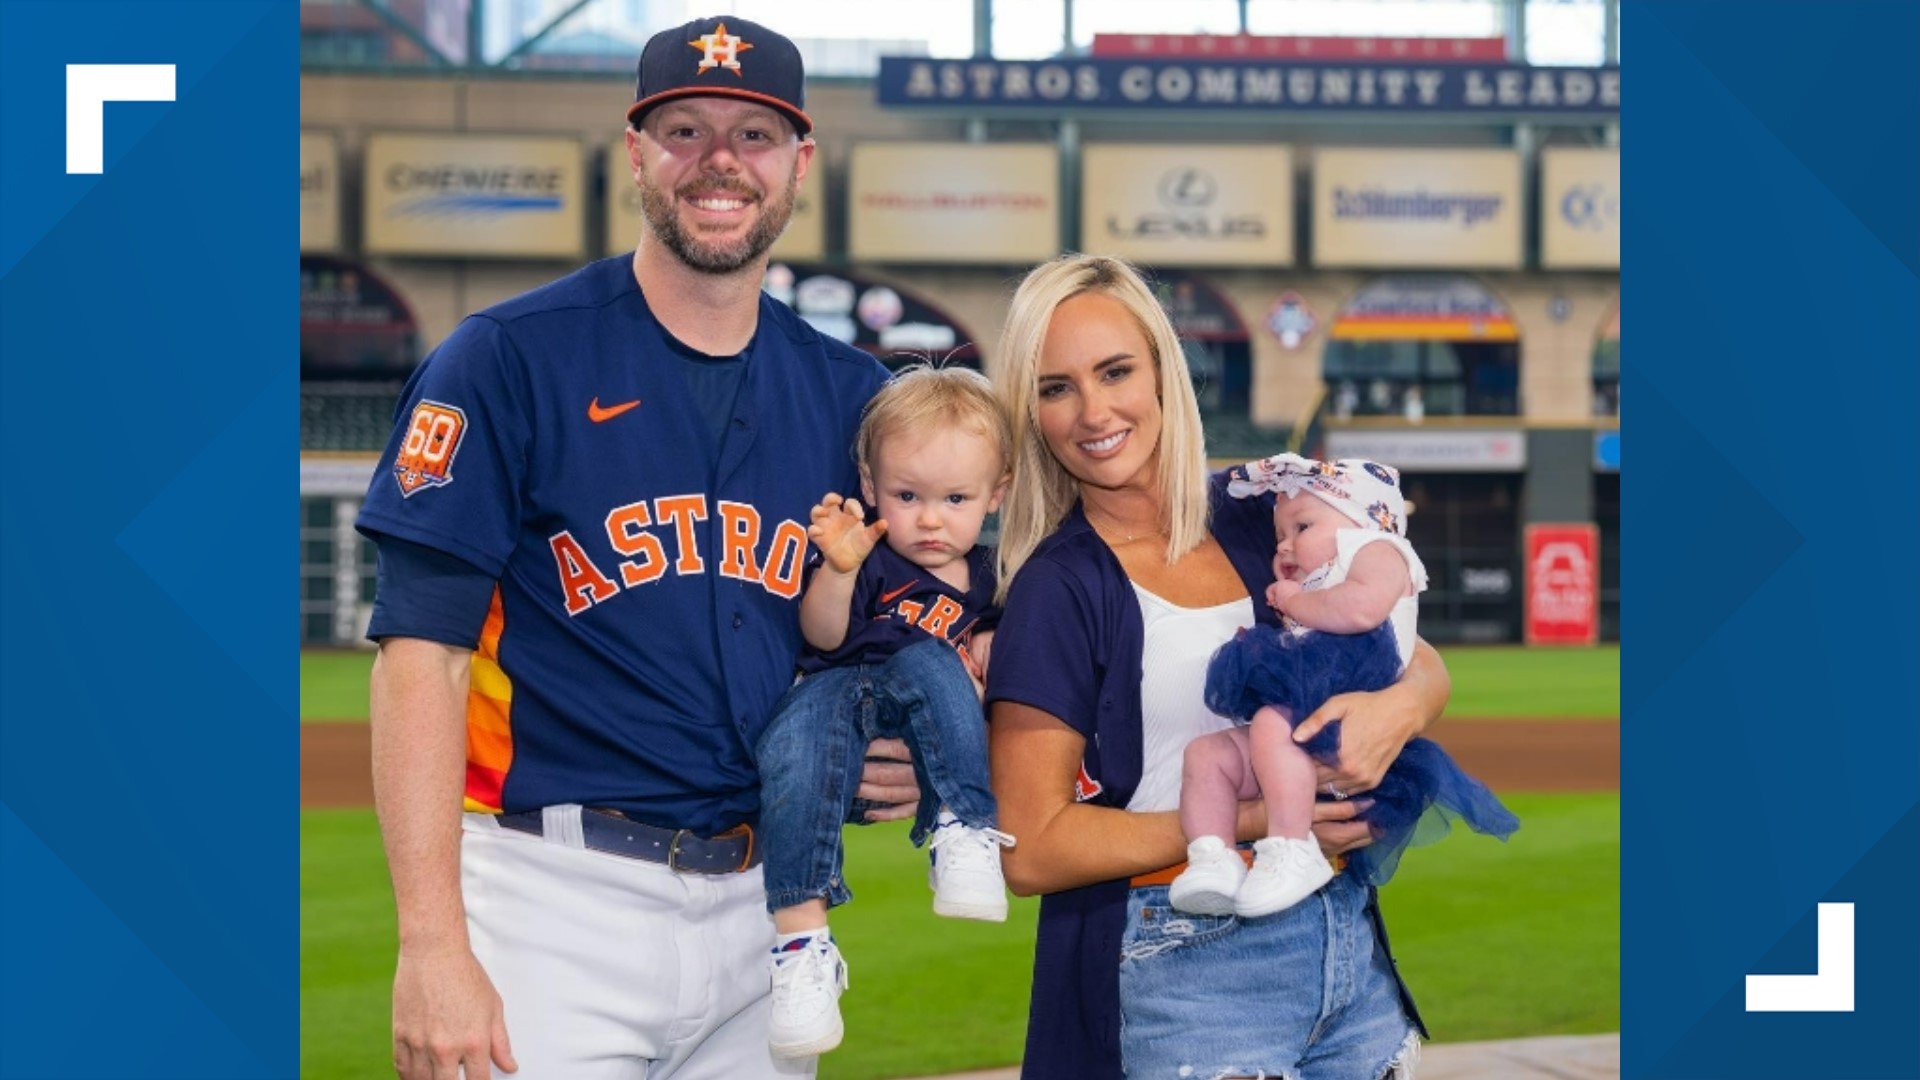 The wife of Astros closer Ryan Pressly has her hands full with an 11-month-old and 3-month-old. She says becoming a dad was a game changer for Ryan.